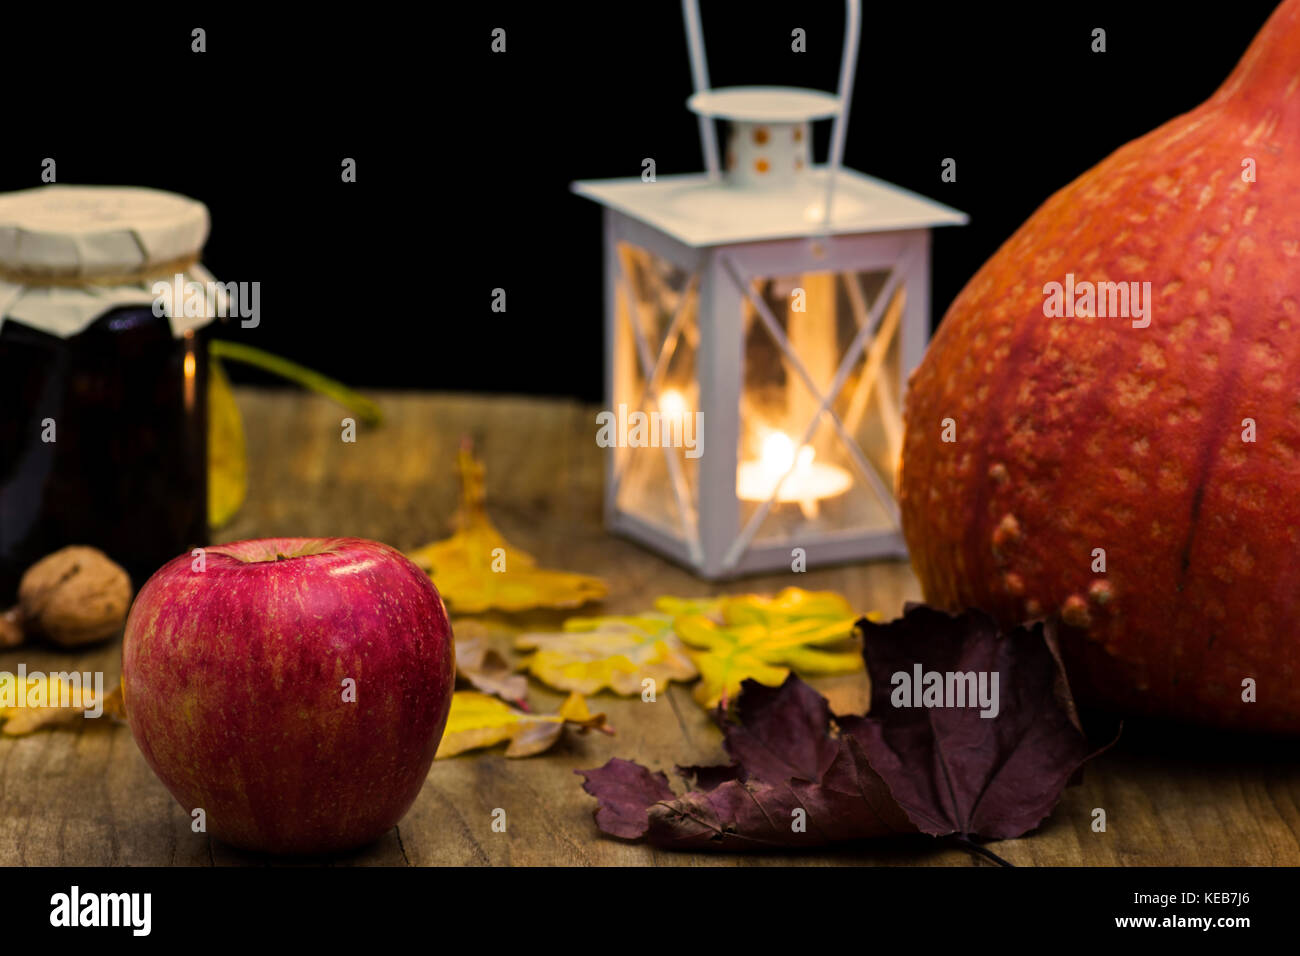 Dark autumn still life with pumpkin, candle and lamp, with yellow leaves of trees on old wooden table board - atmosphere with warm colors Stock Photo